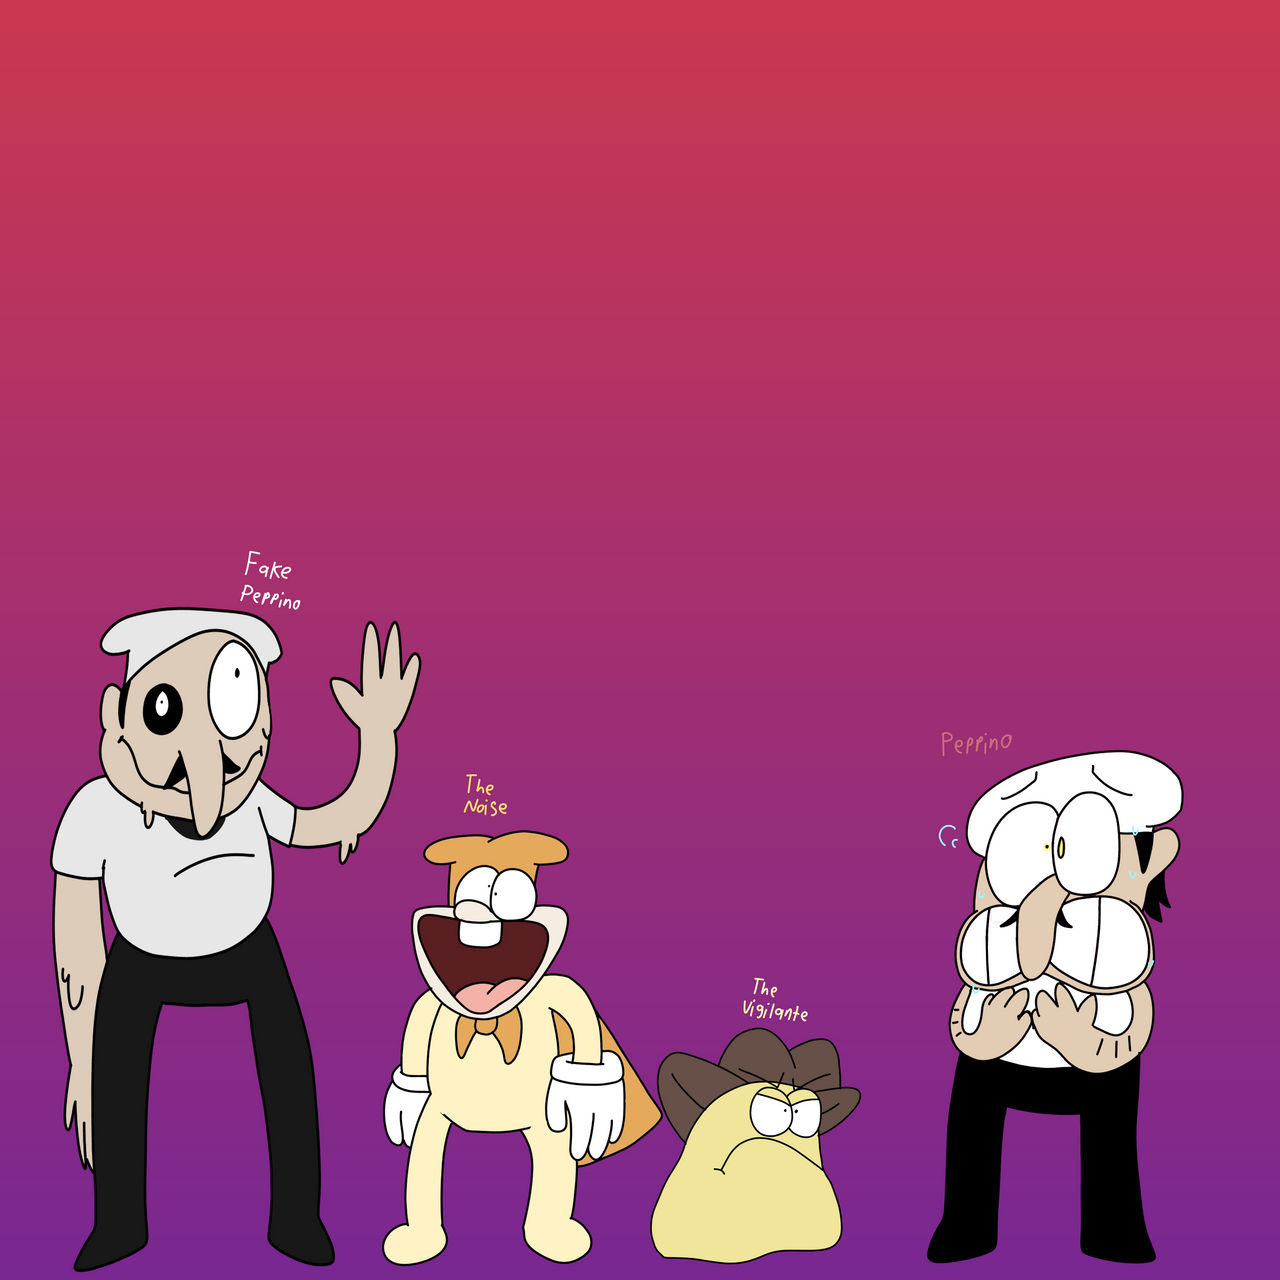 Pizza Tower Character Lineup by Sandette on DeviantArt